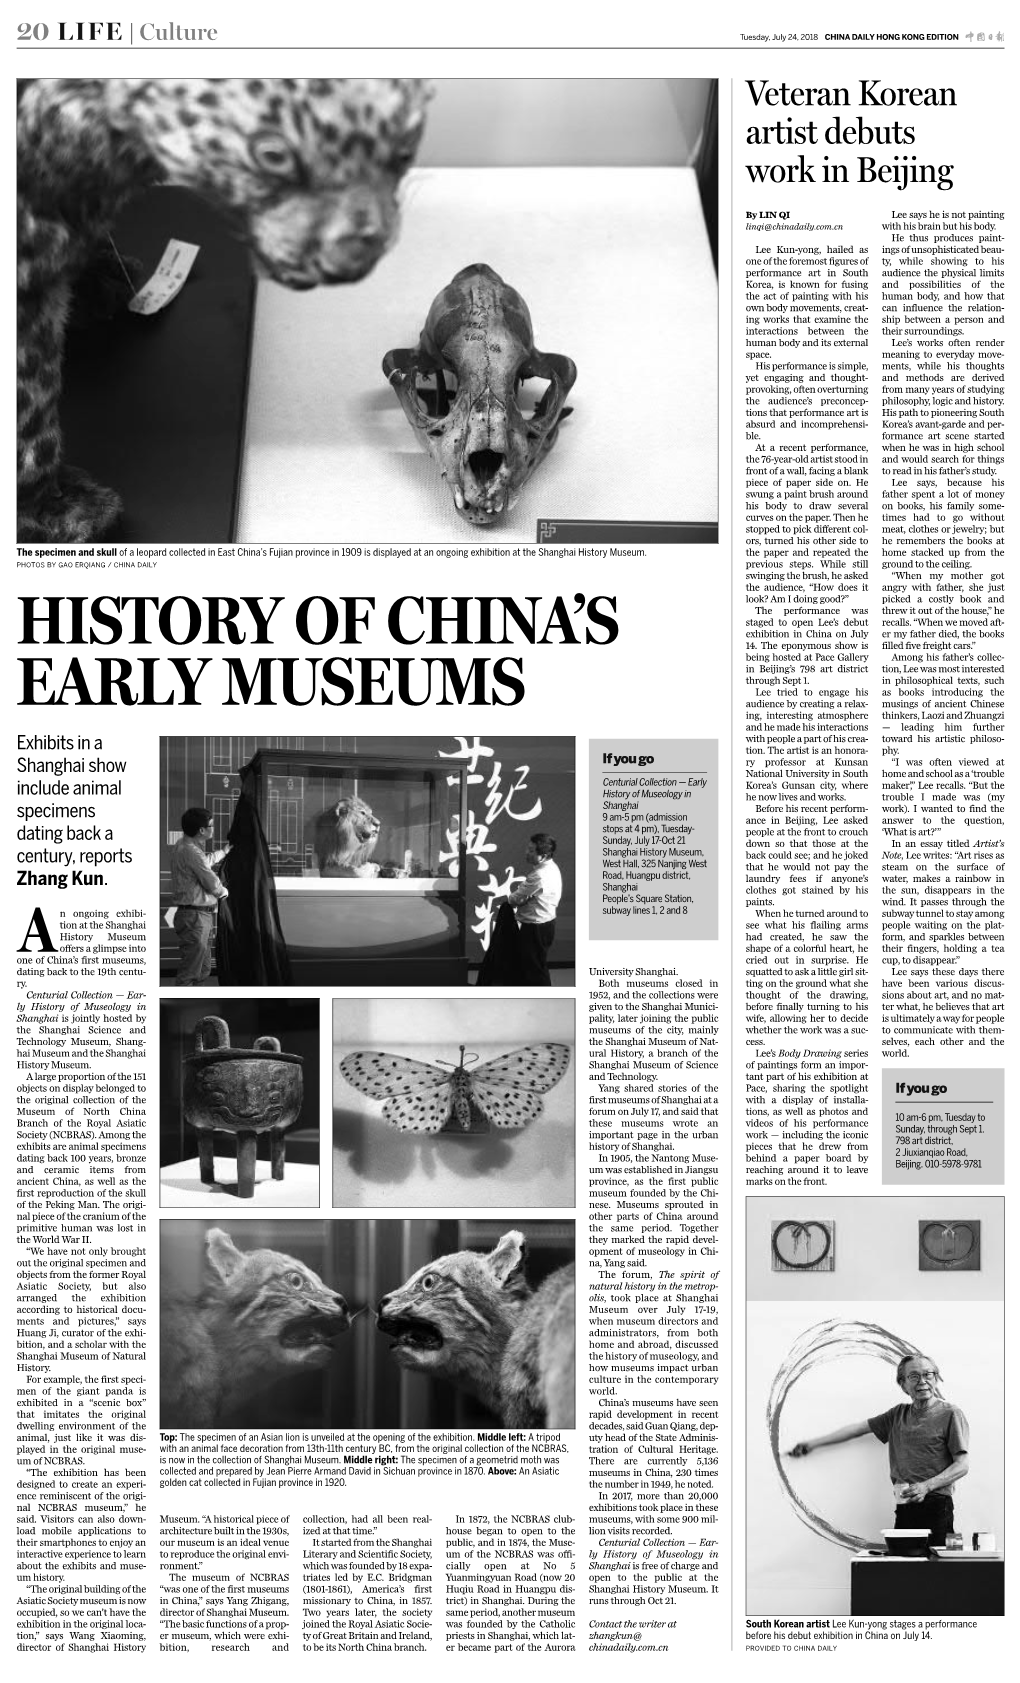 History of China's Early Museums